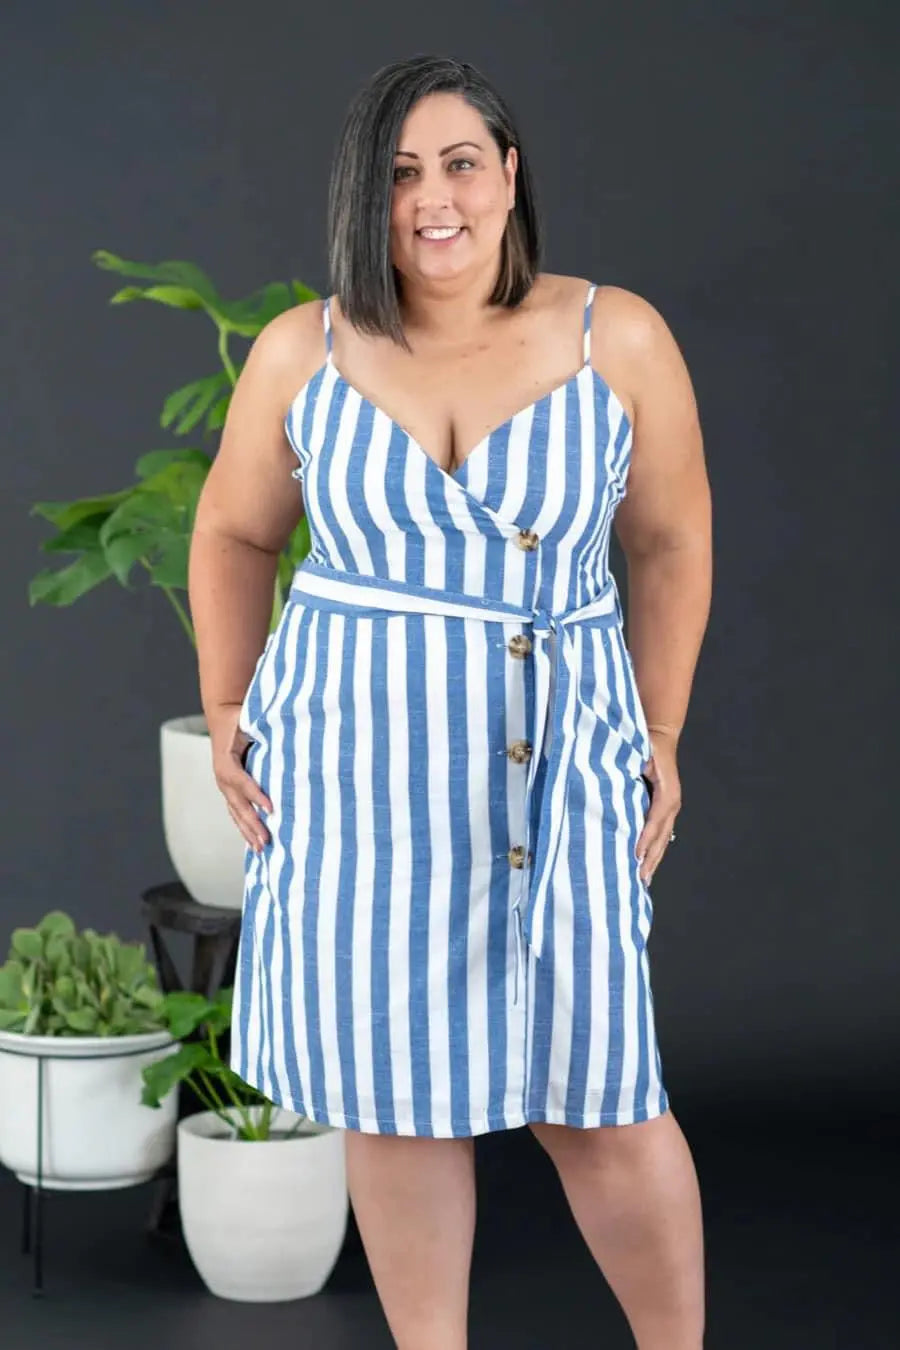 Never-Let-Go Striped Sleeveless Dress-dress-Styled by Steph-Styled by Steph-Women's Fashion Clothing Boutique, Indiana